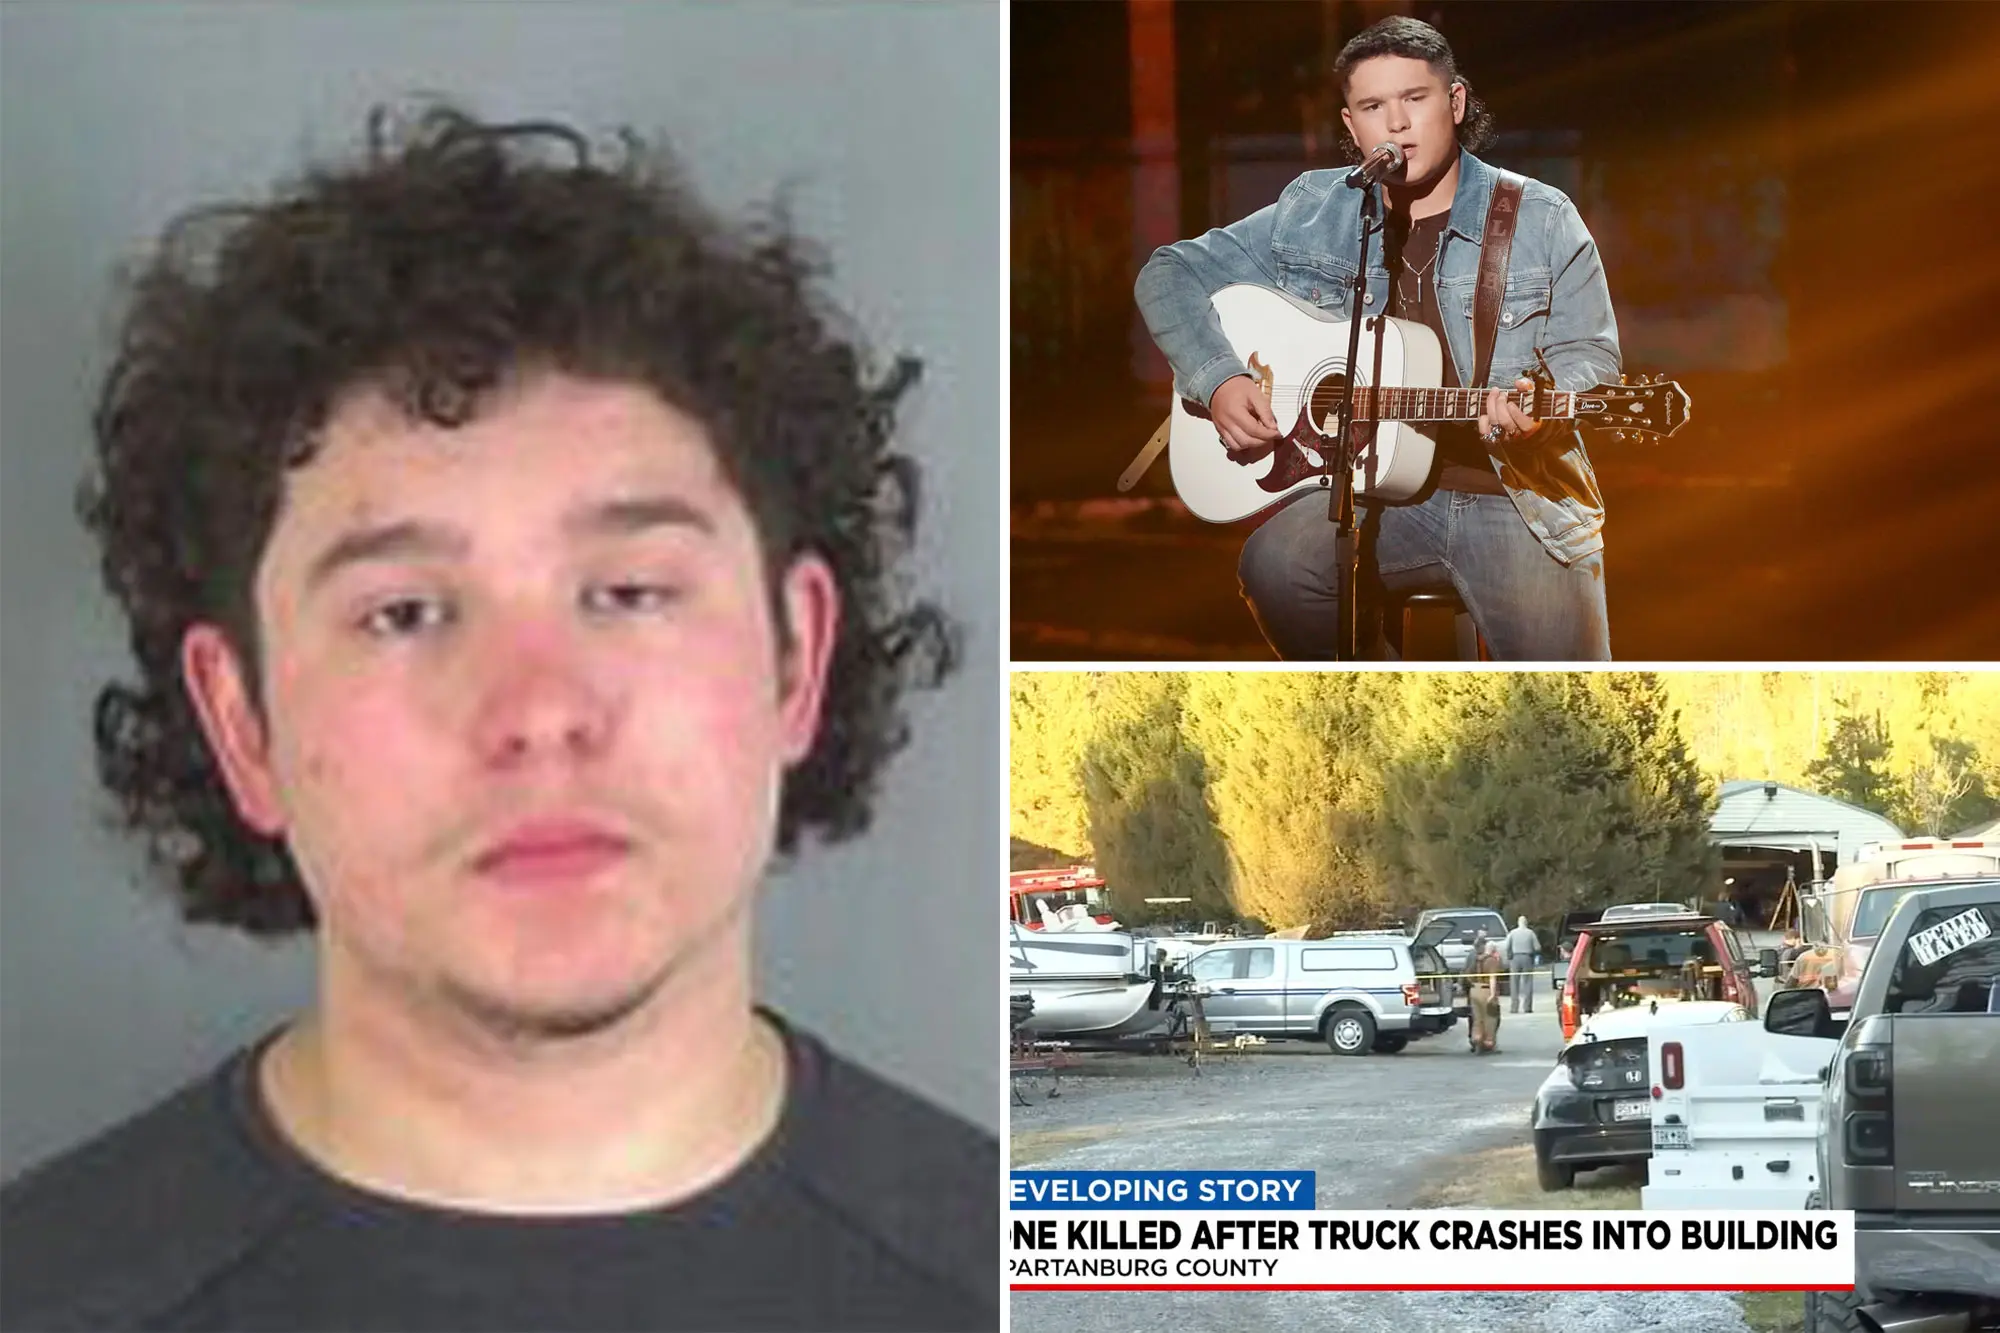 Caleb Kennedy, former American Idol contestant, charged after fatal wreck. Here's what we know.